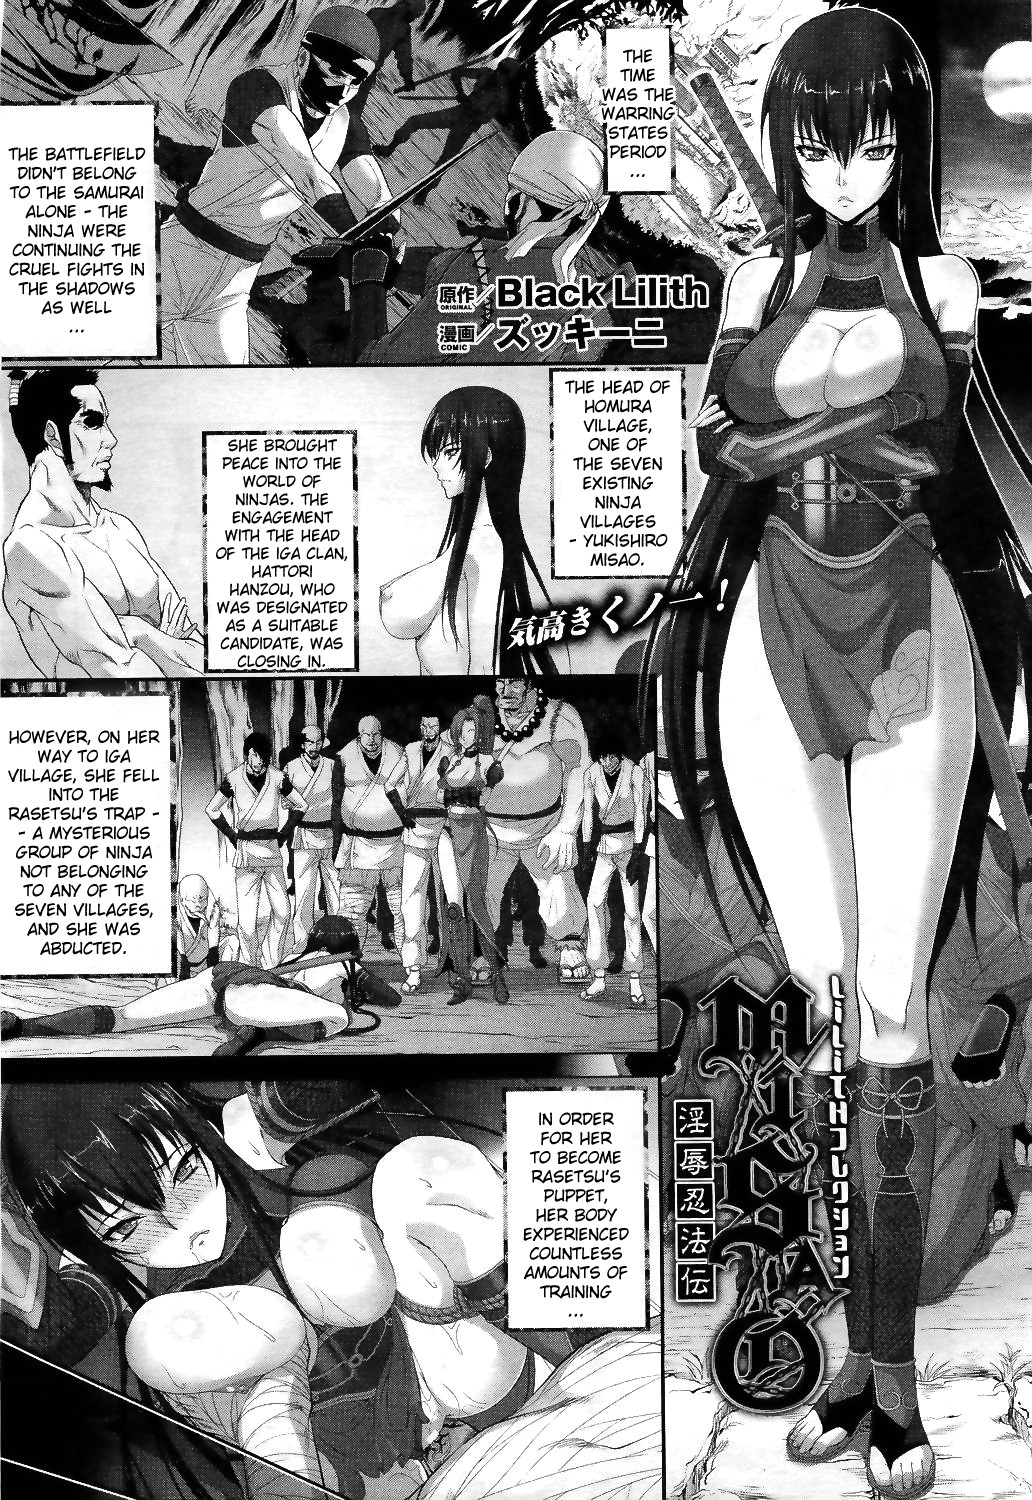 [Zucchini] Misao - Sex Slave Ninpo Legend [Eng] {doujin-moe.us} page 1 full